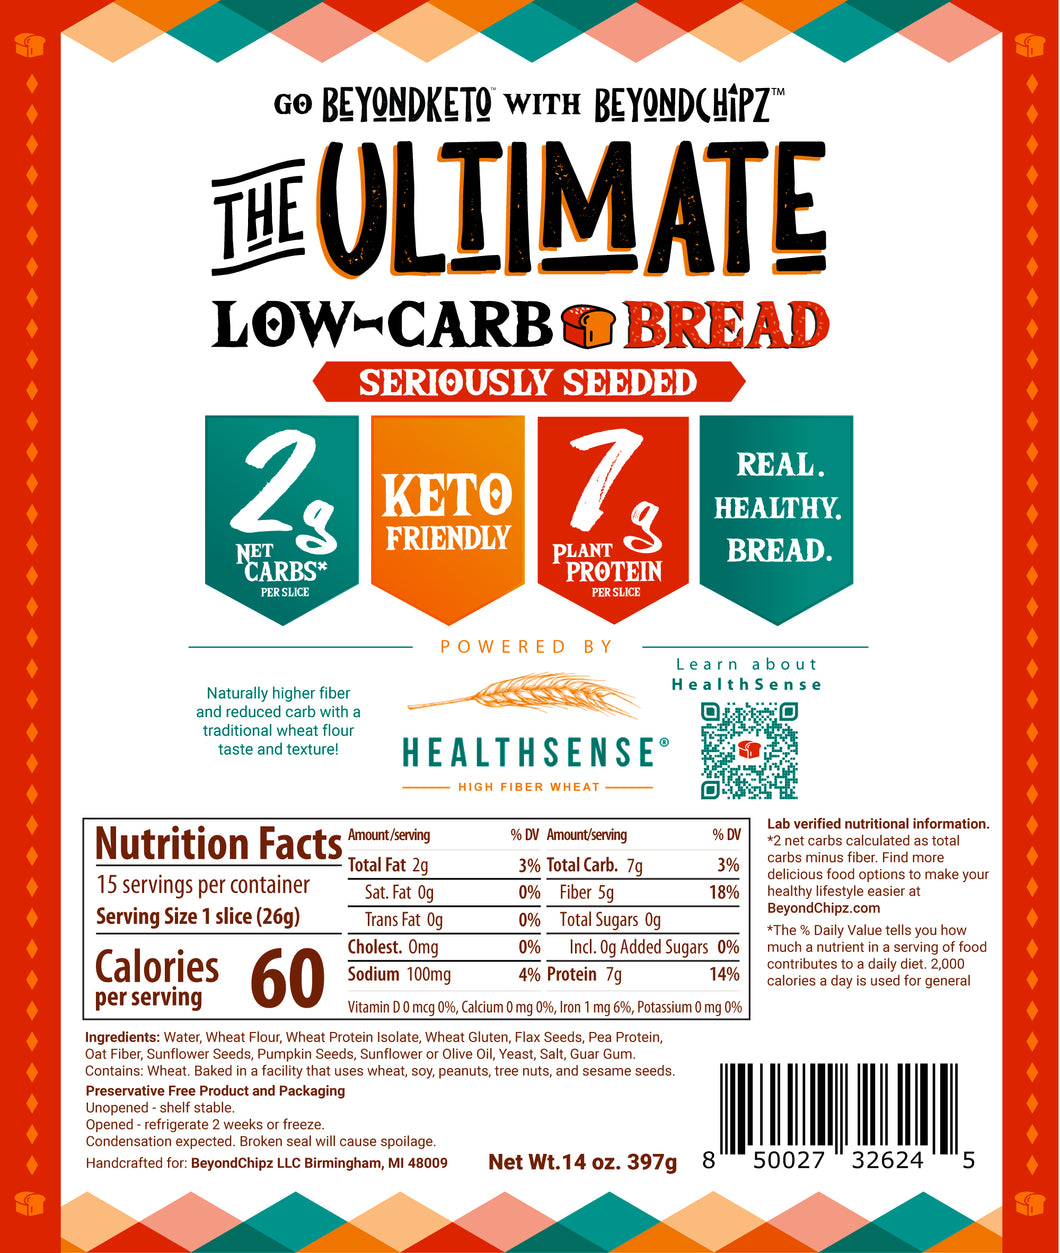 The Ultimate Low Carb Bread